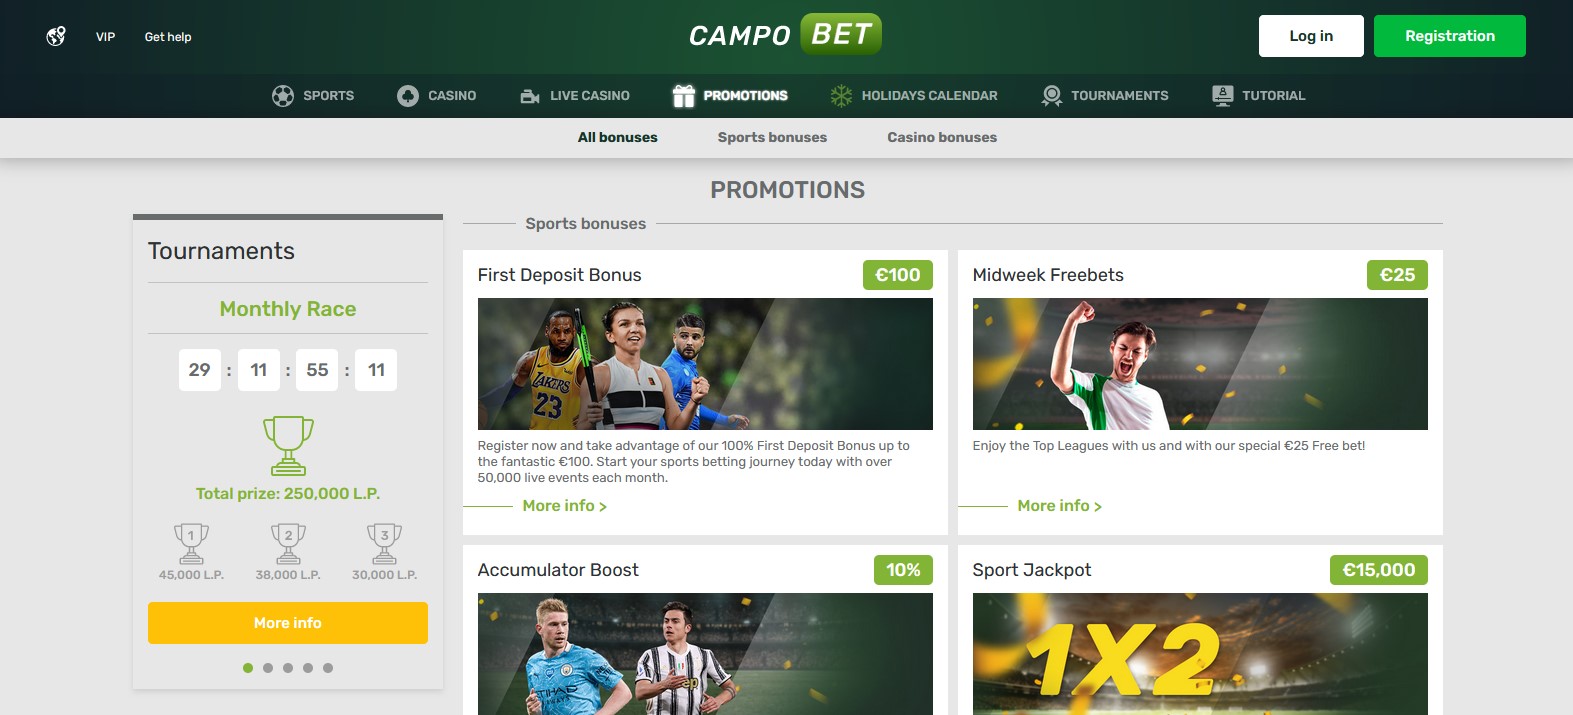 The Future of Online Gambling: An Analysis of Campo Bet's Role in it